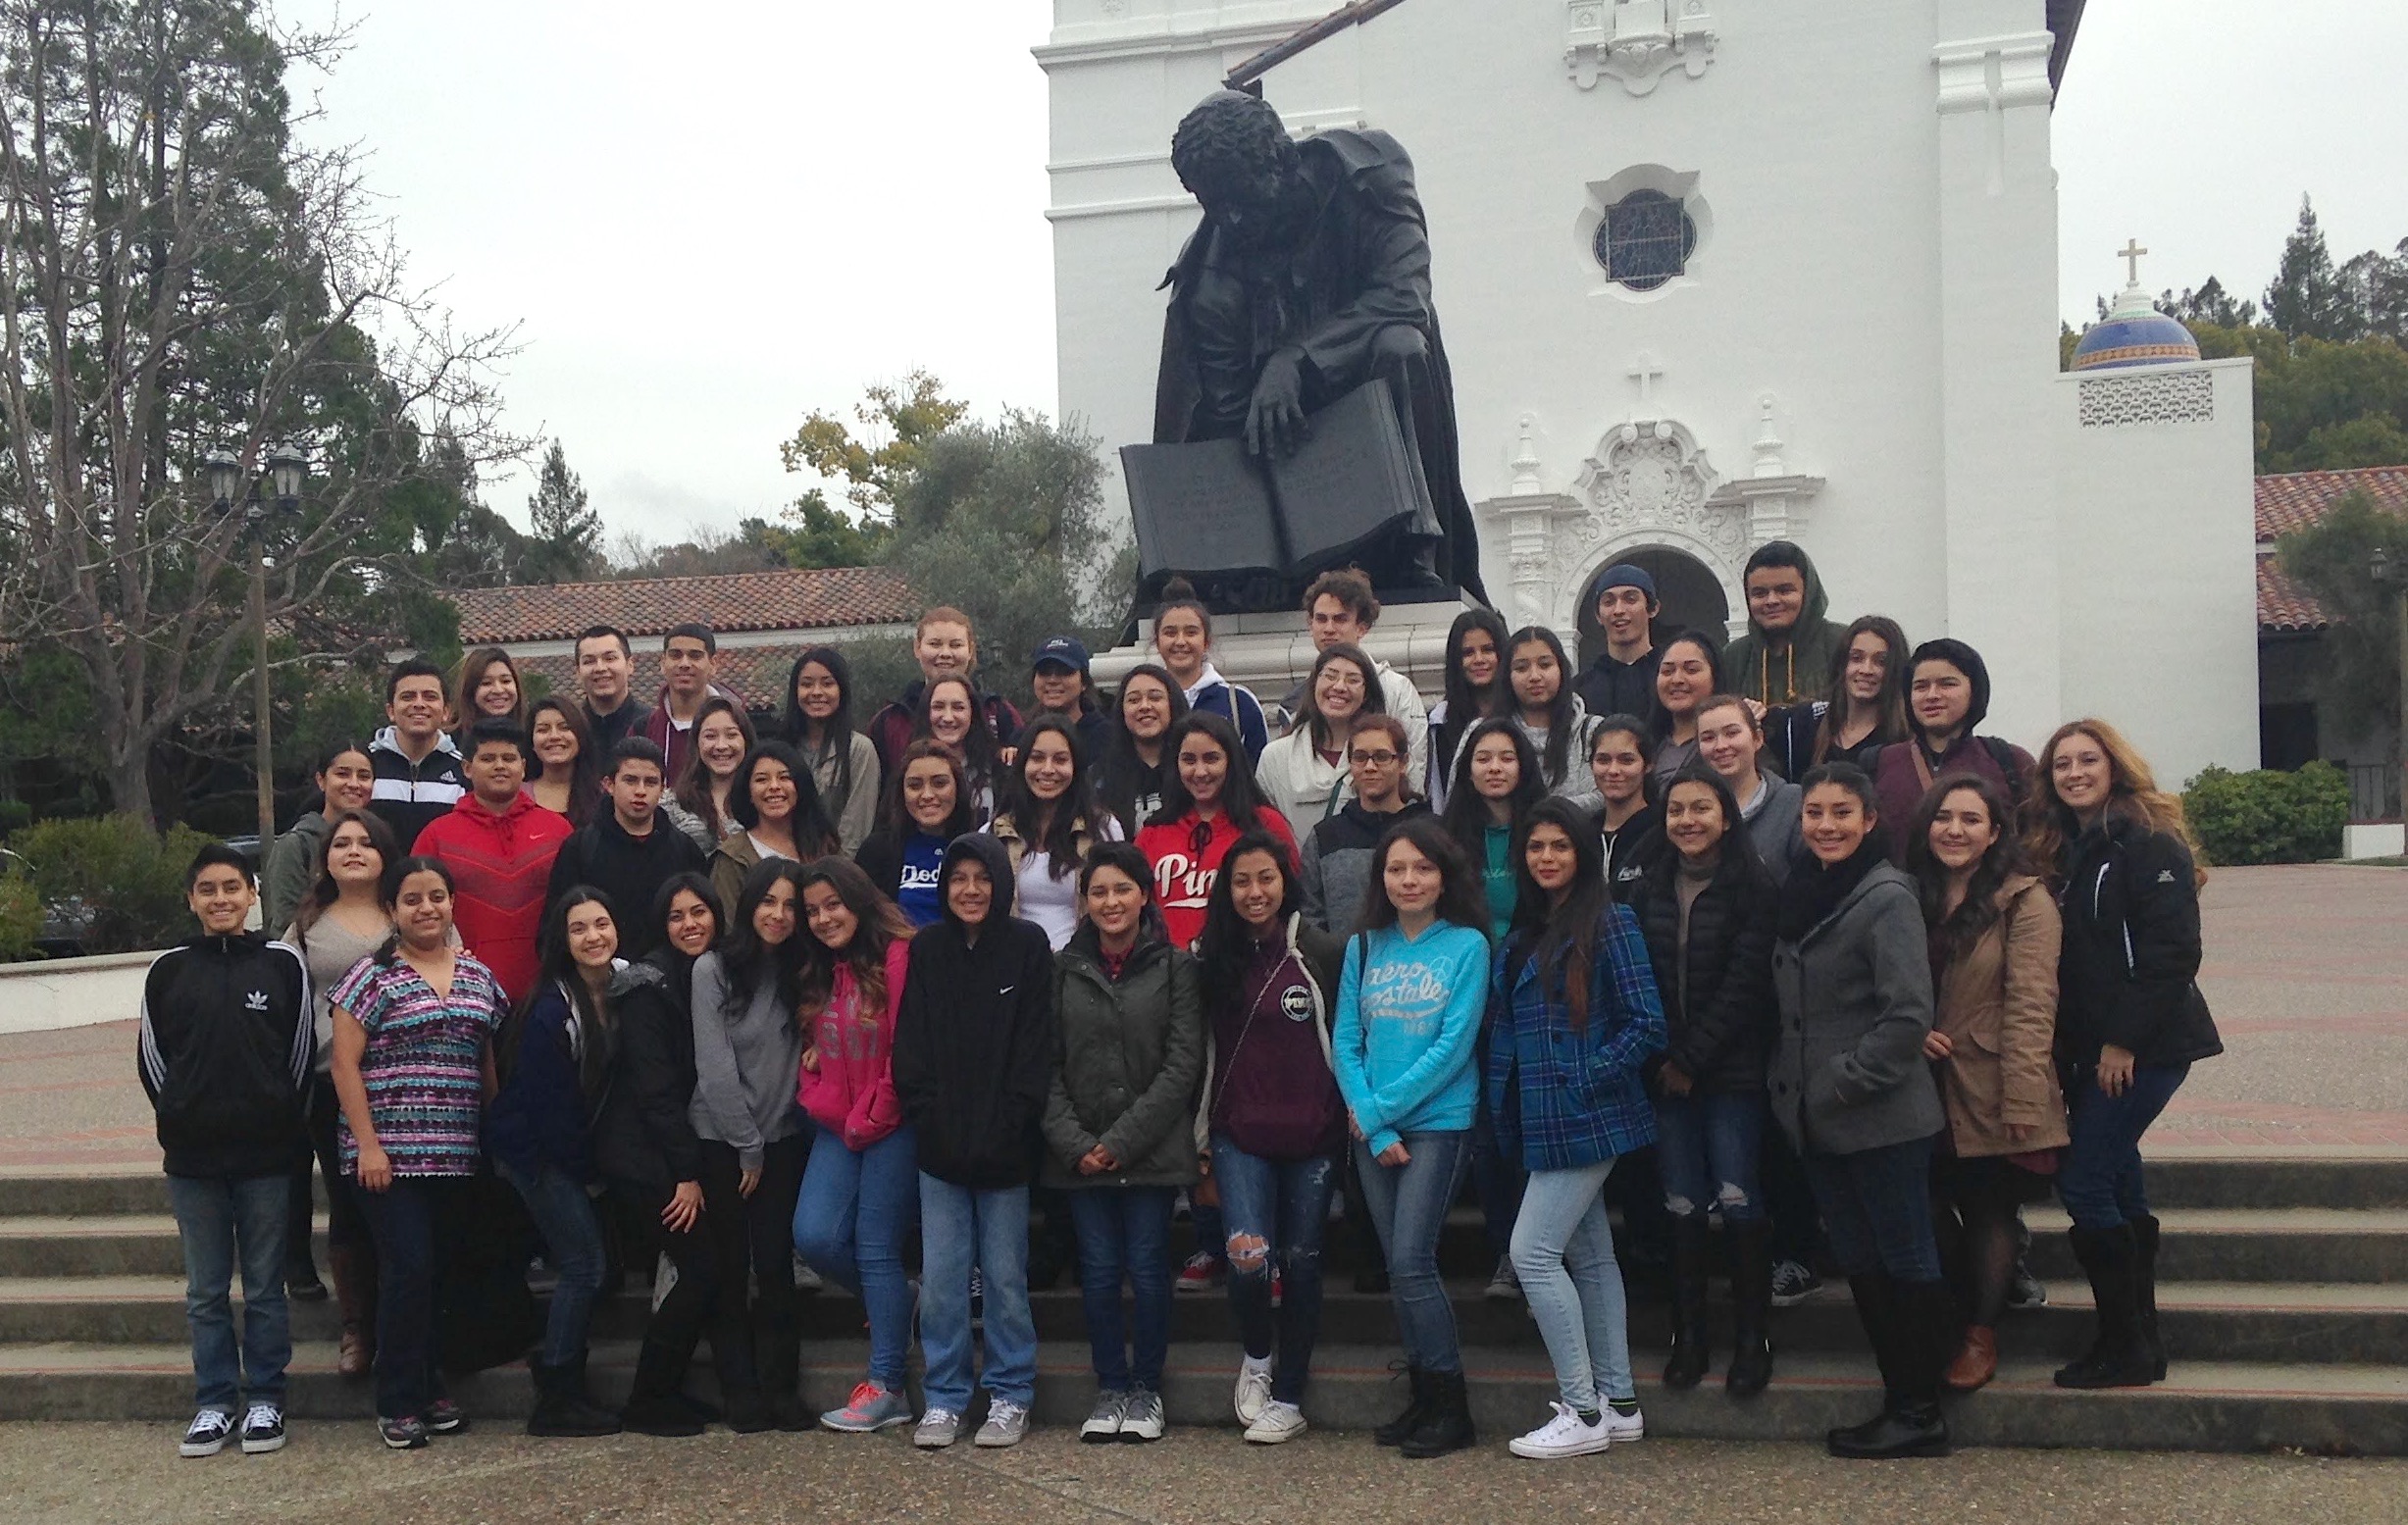 Dozens of high school students smile in front of the Saint Mary's chapel